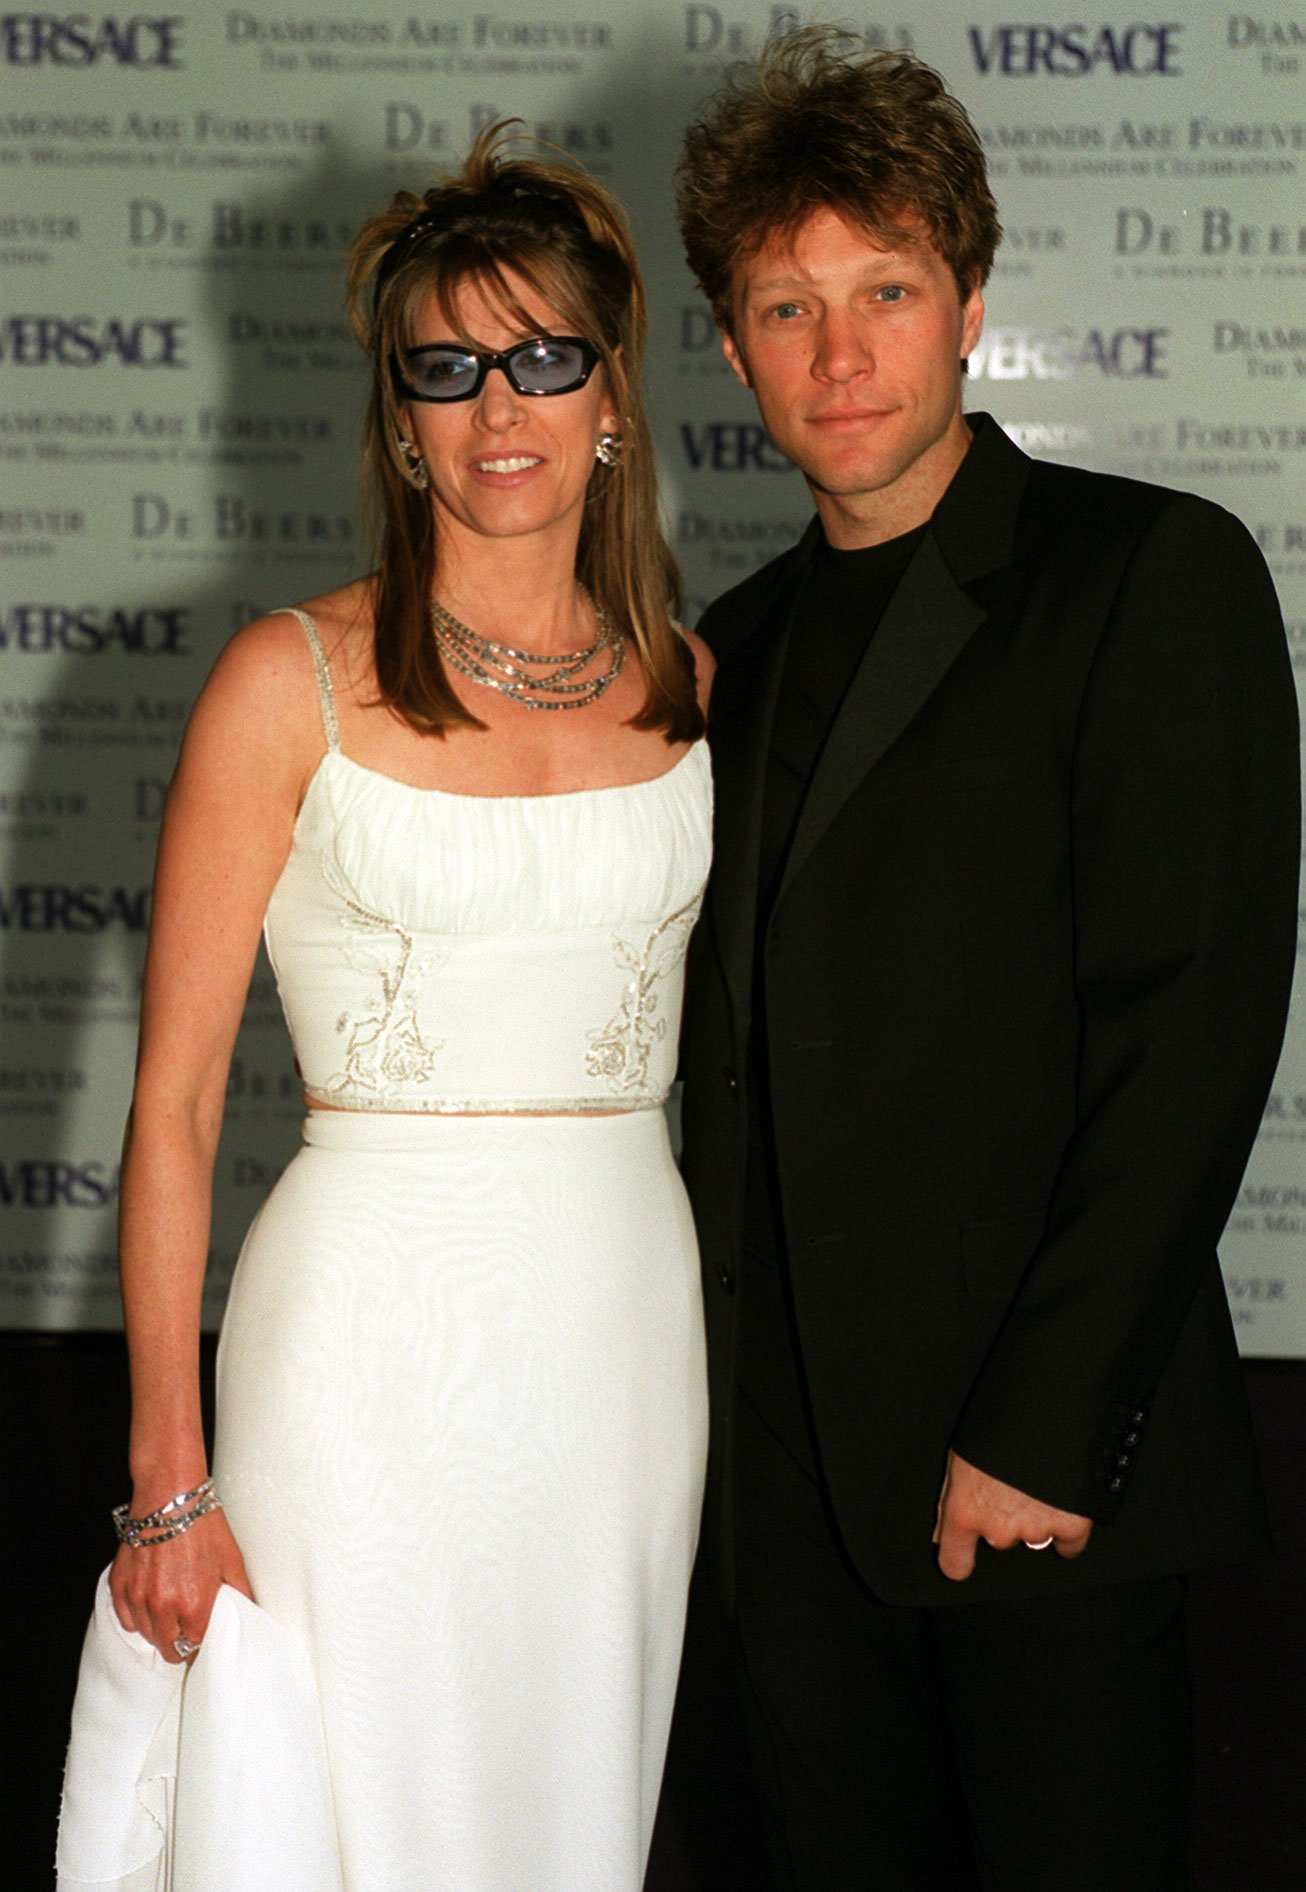 Jon Bon Jovi and Dorothea Hurley at the Donatella Versace/De Beers Diamonds Are Forever: The Millennium Celebration charity fundraising event in, London, on June 9, 1999. | Source: Getty Images